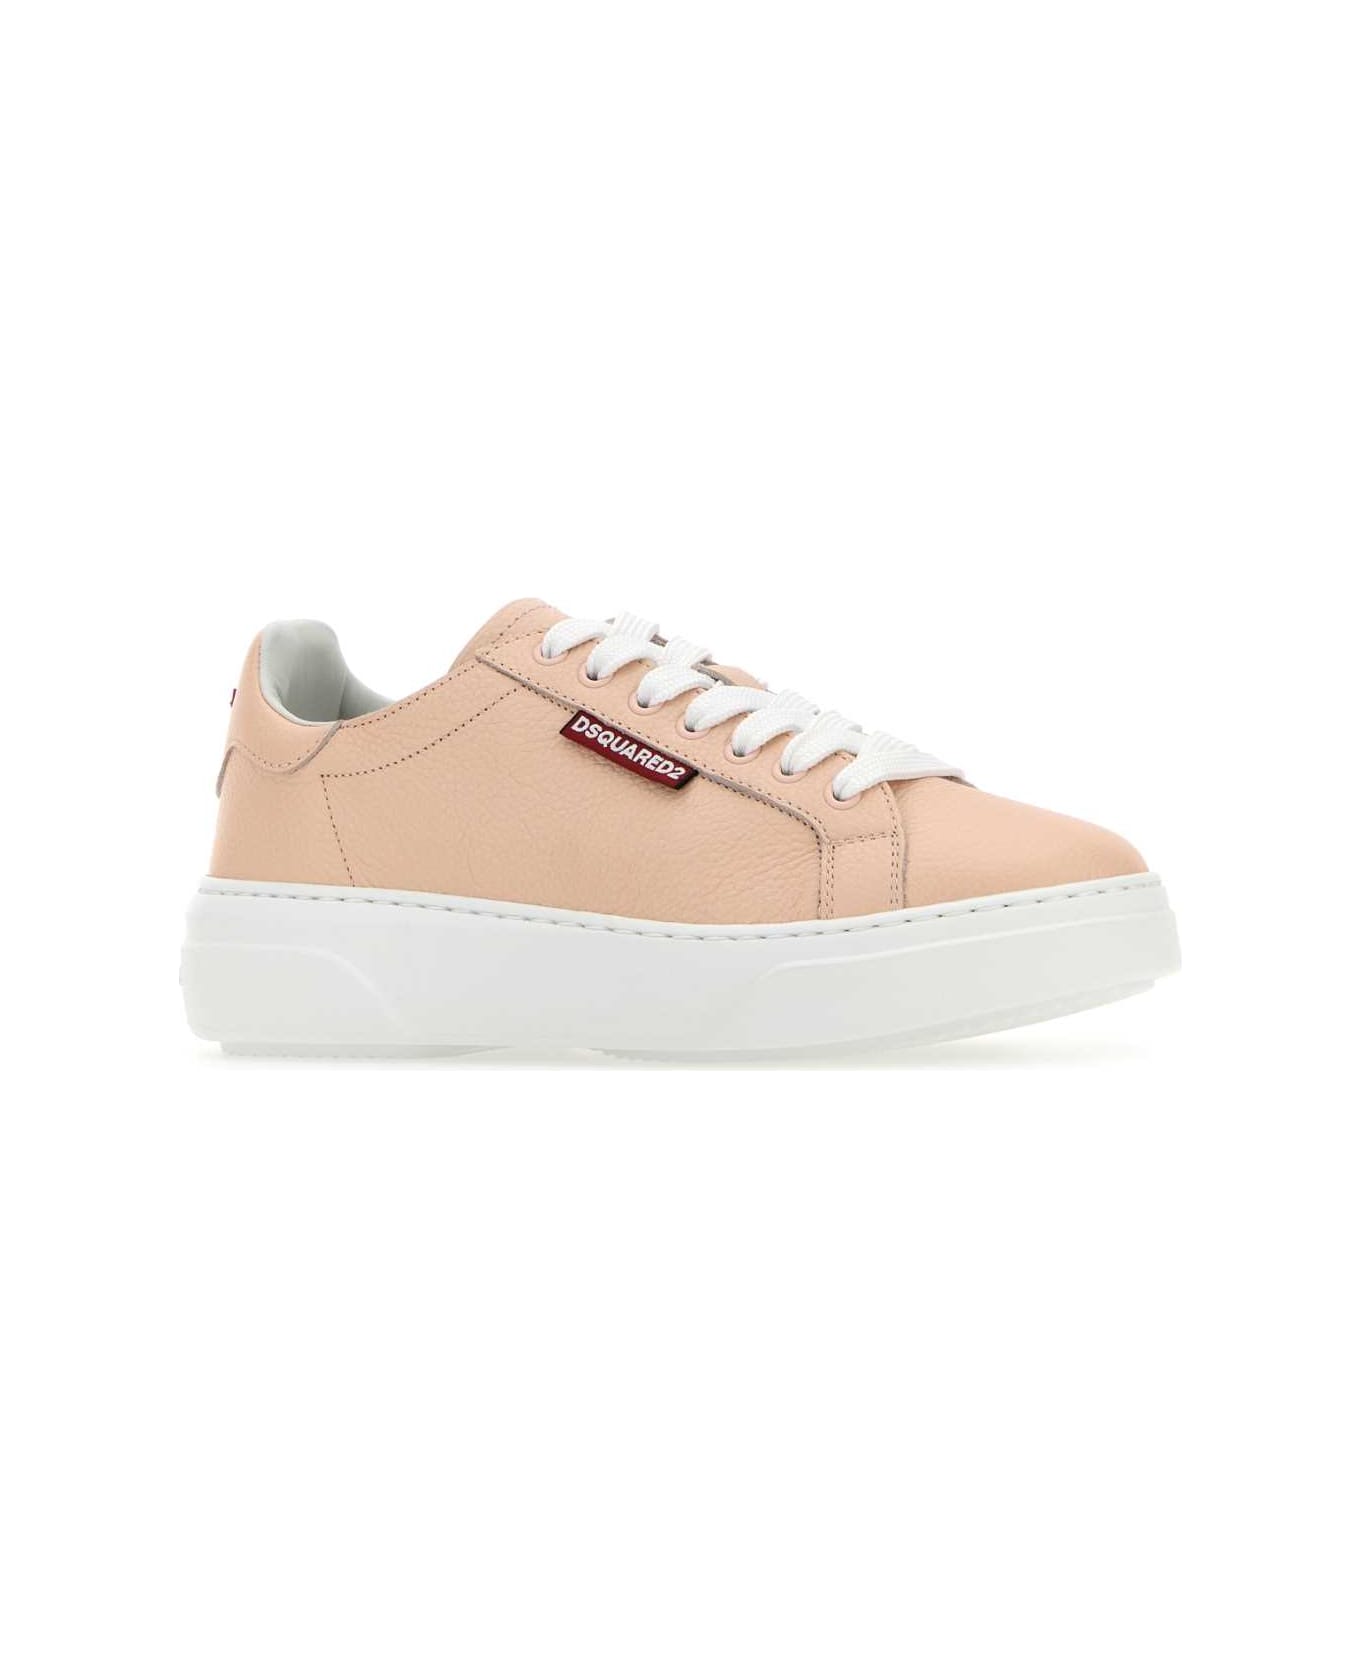 Dsquared2 Light Pink Leather Bumper Sneakers - PINK